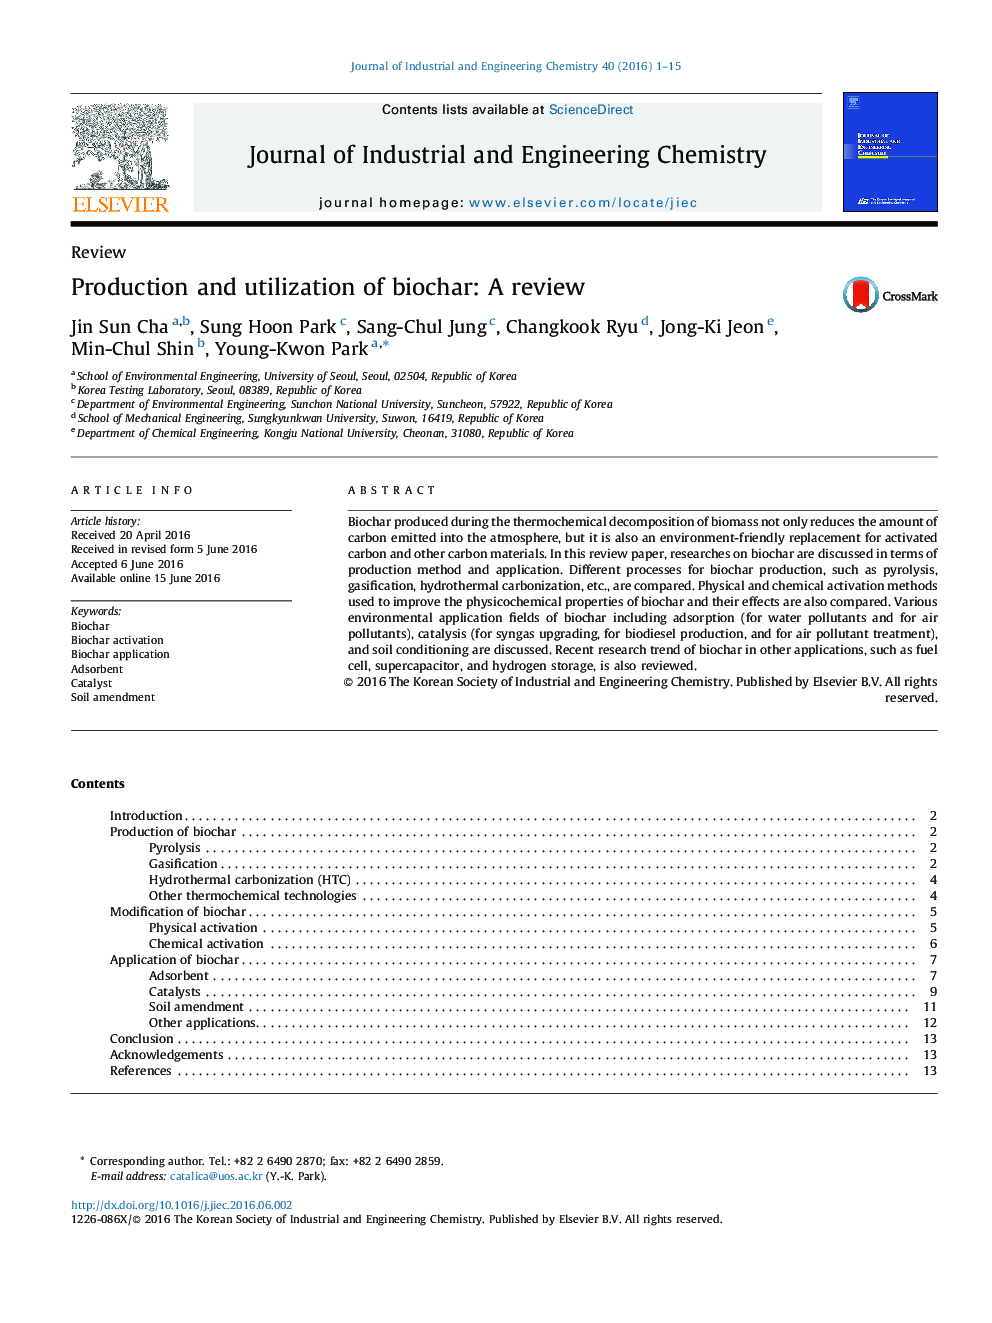 Production and utilization of biochar: A review